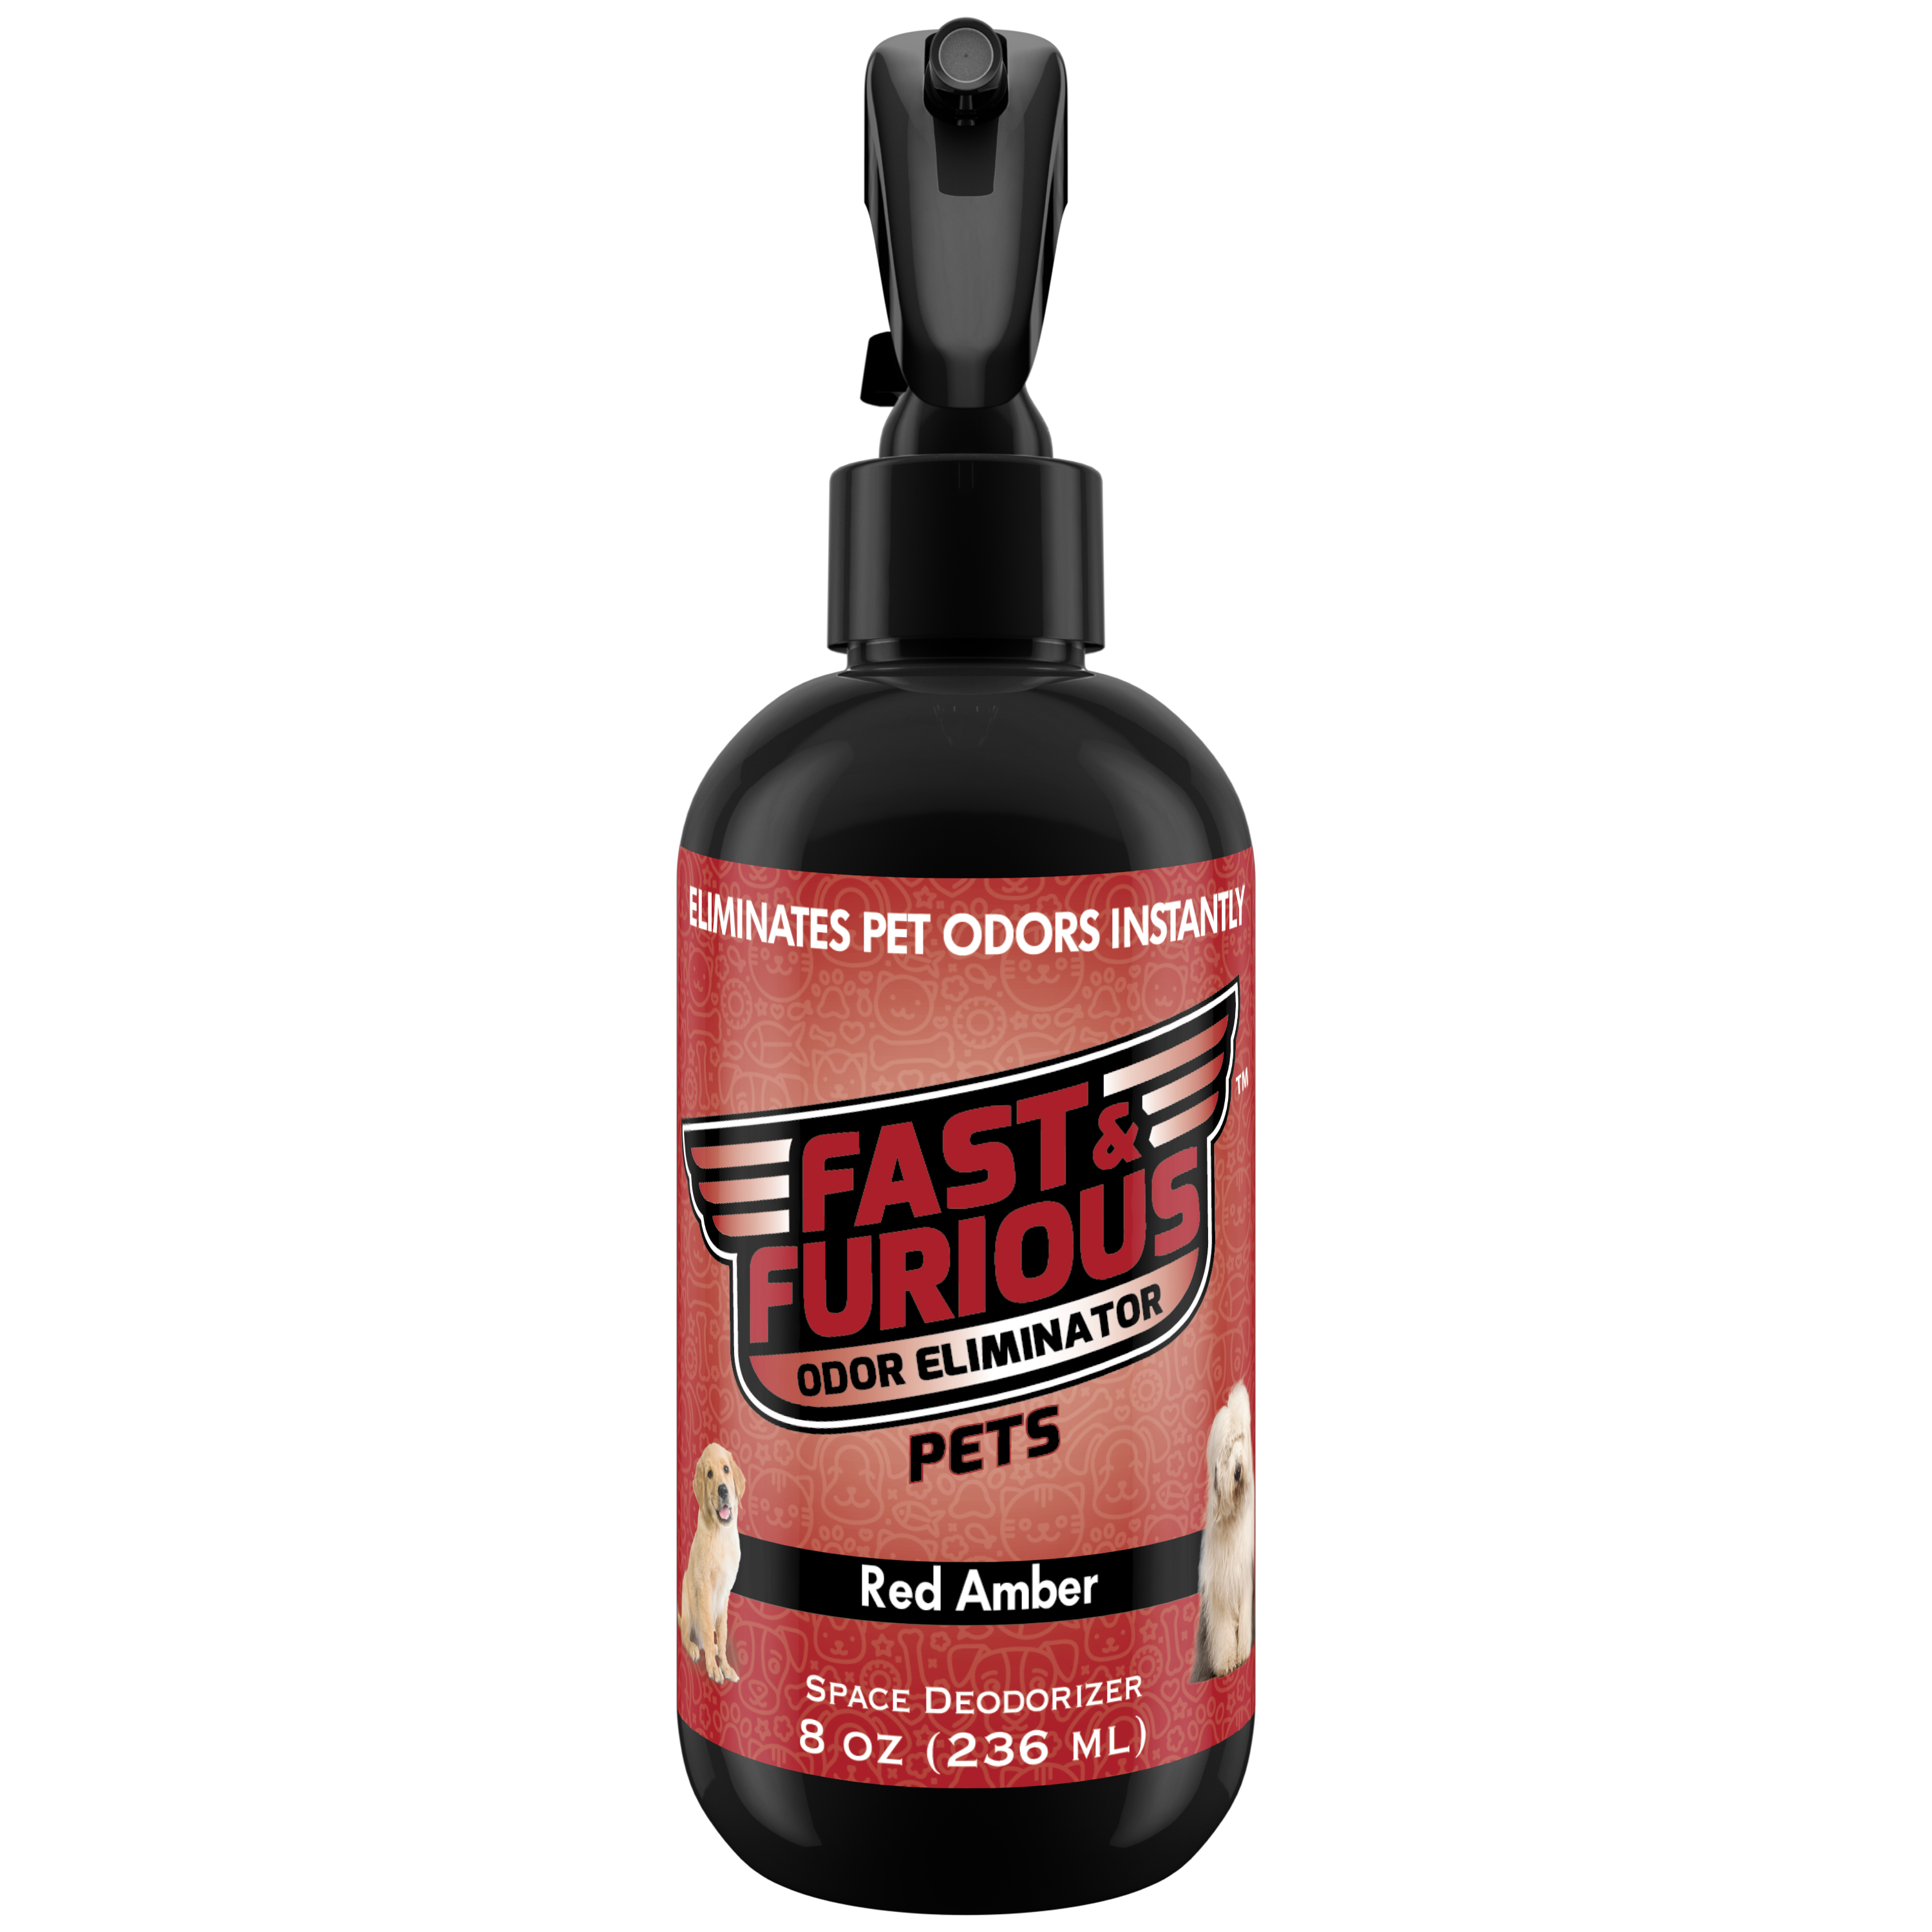 Fast and Furious Pets Odor Eliminator - Red Amber Scent